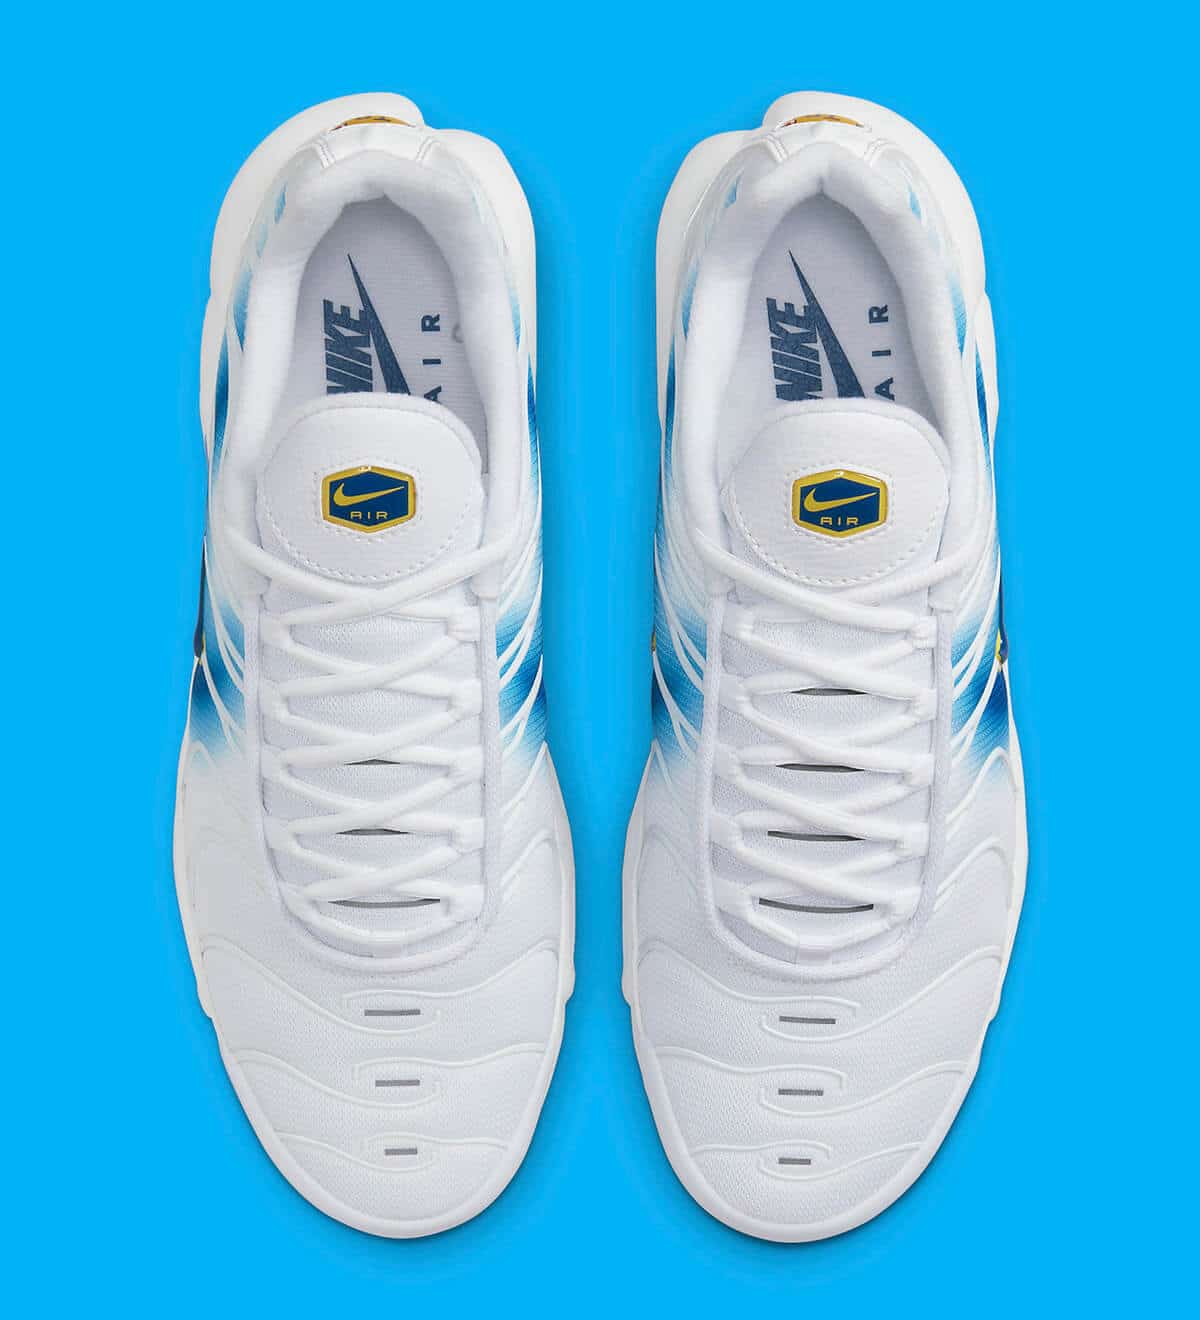 nike air max plus white blue yellow dx8962 100 release date 4